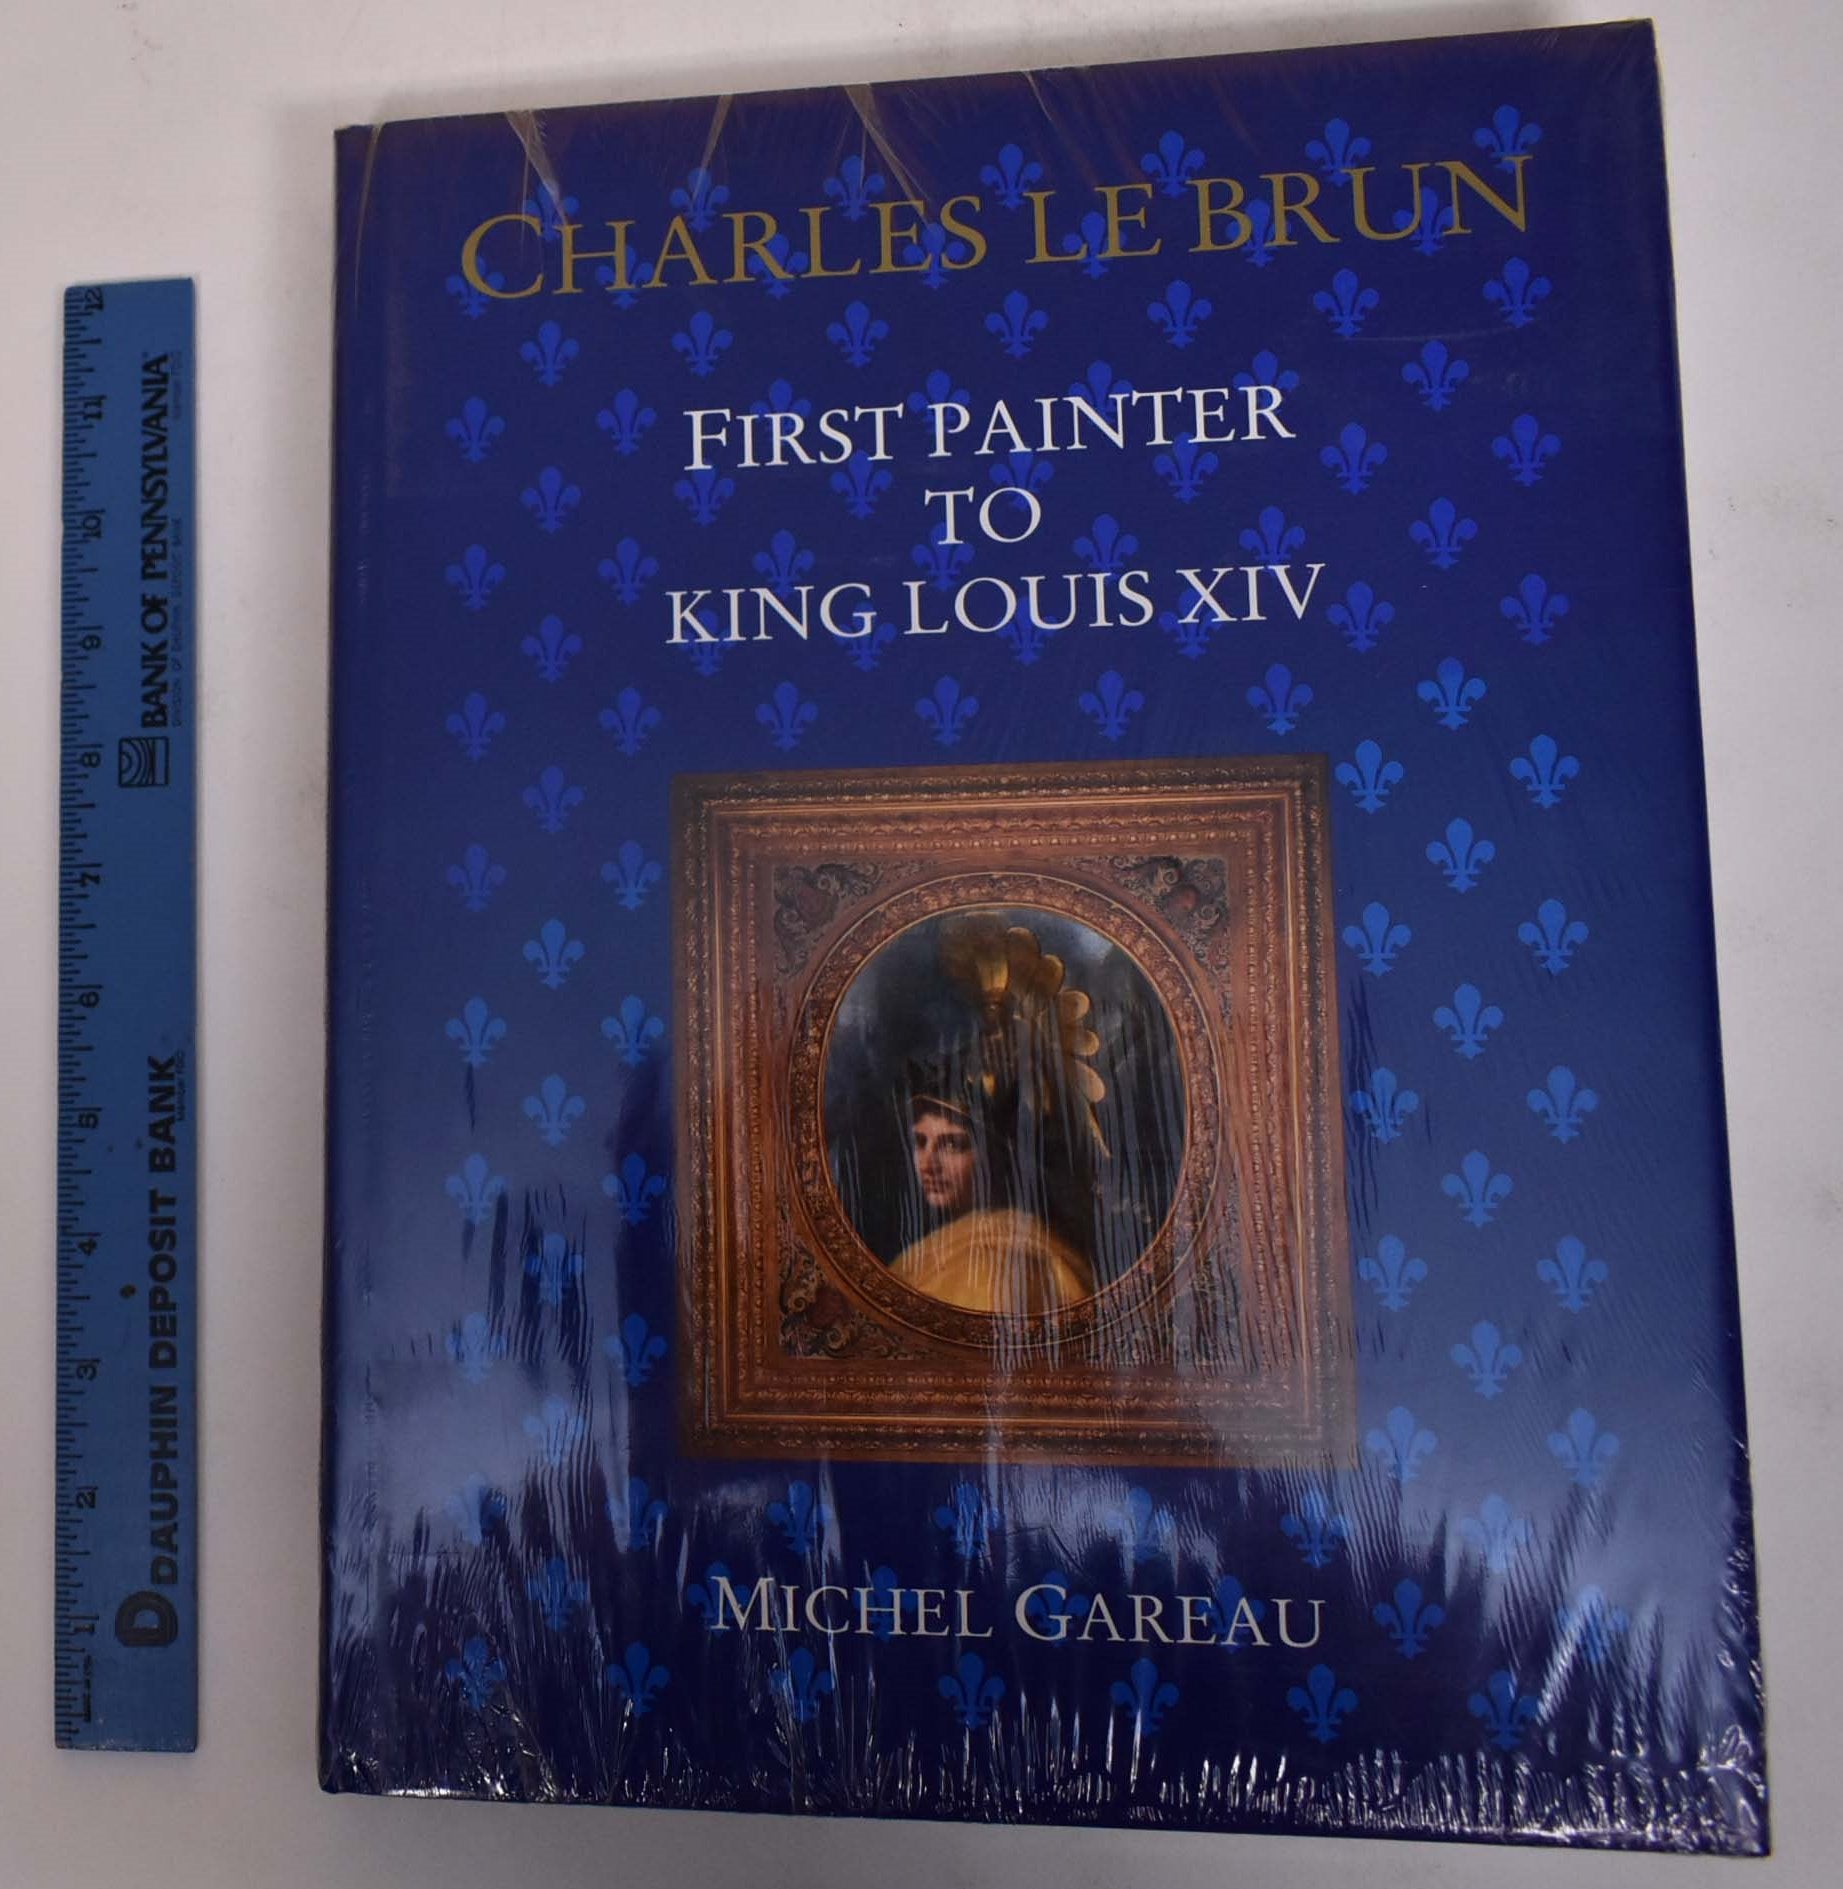 Charles Le Brun: First Painter to King Louis XIV by Michel Gareau on Mullen  Books